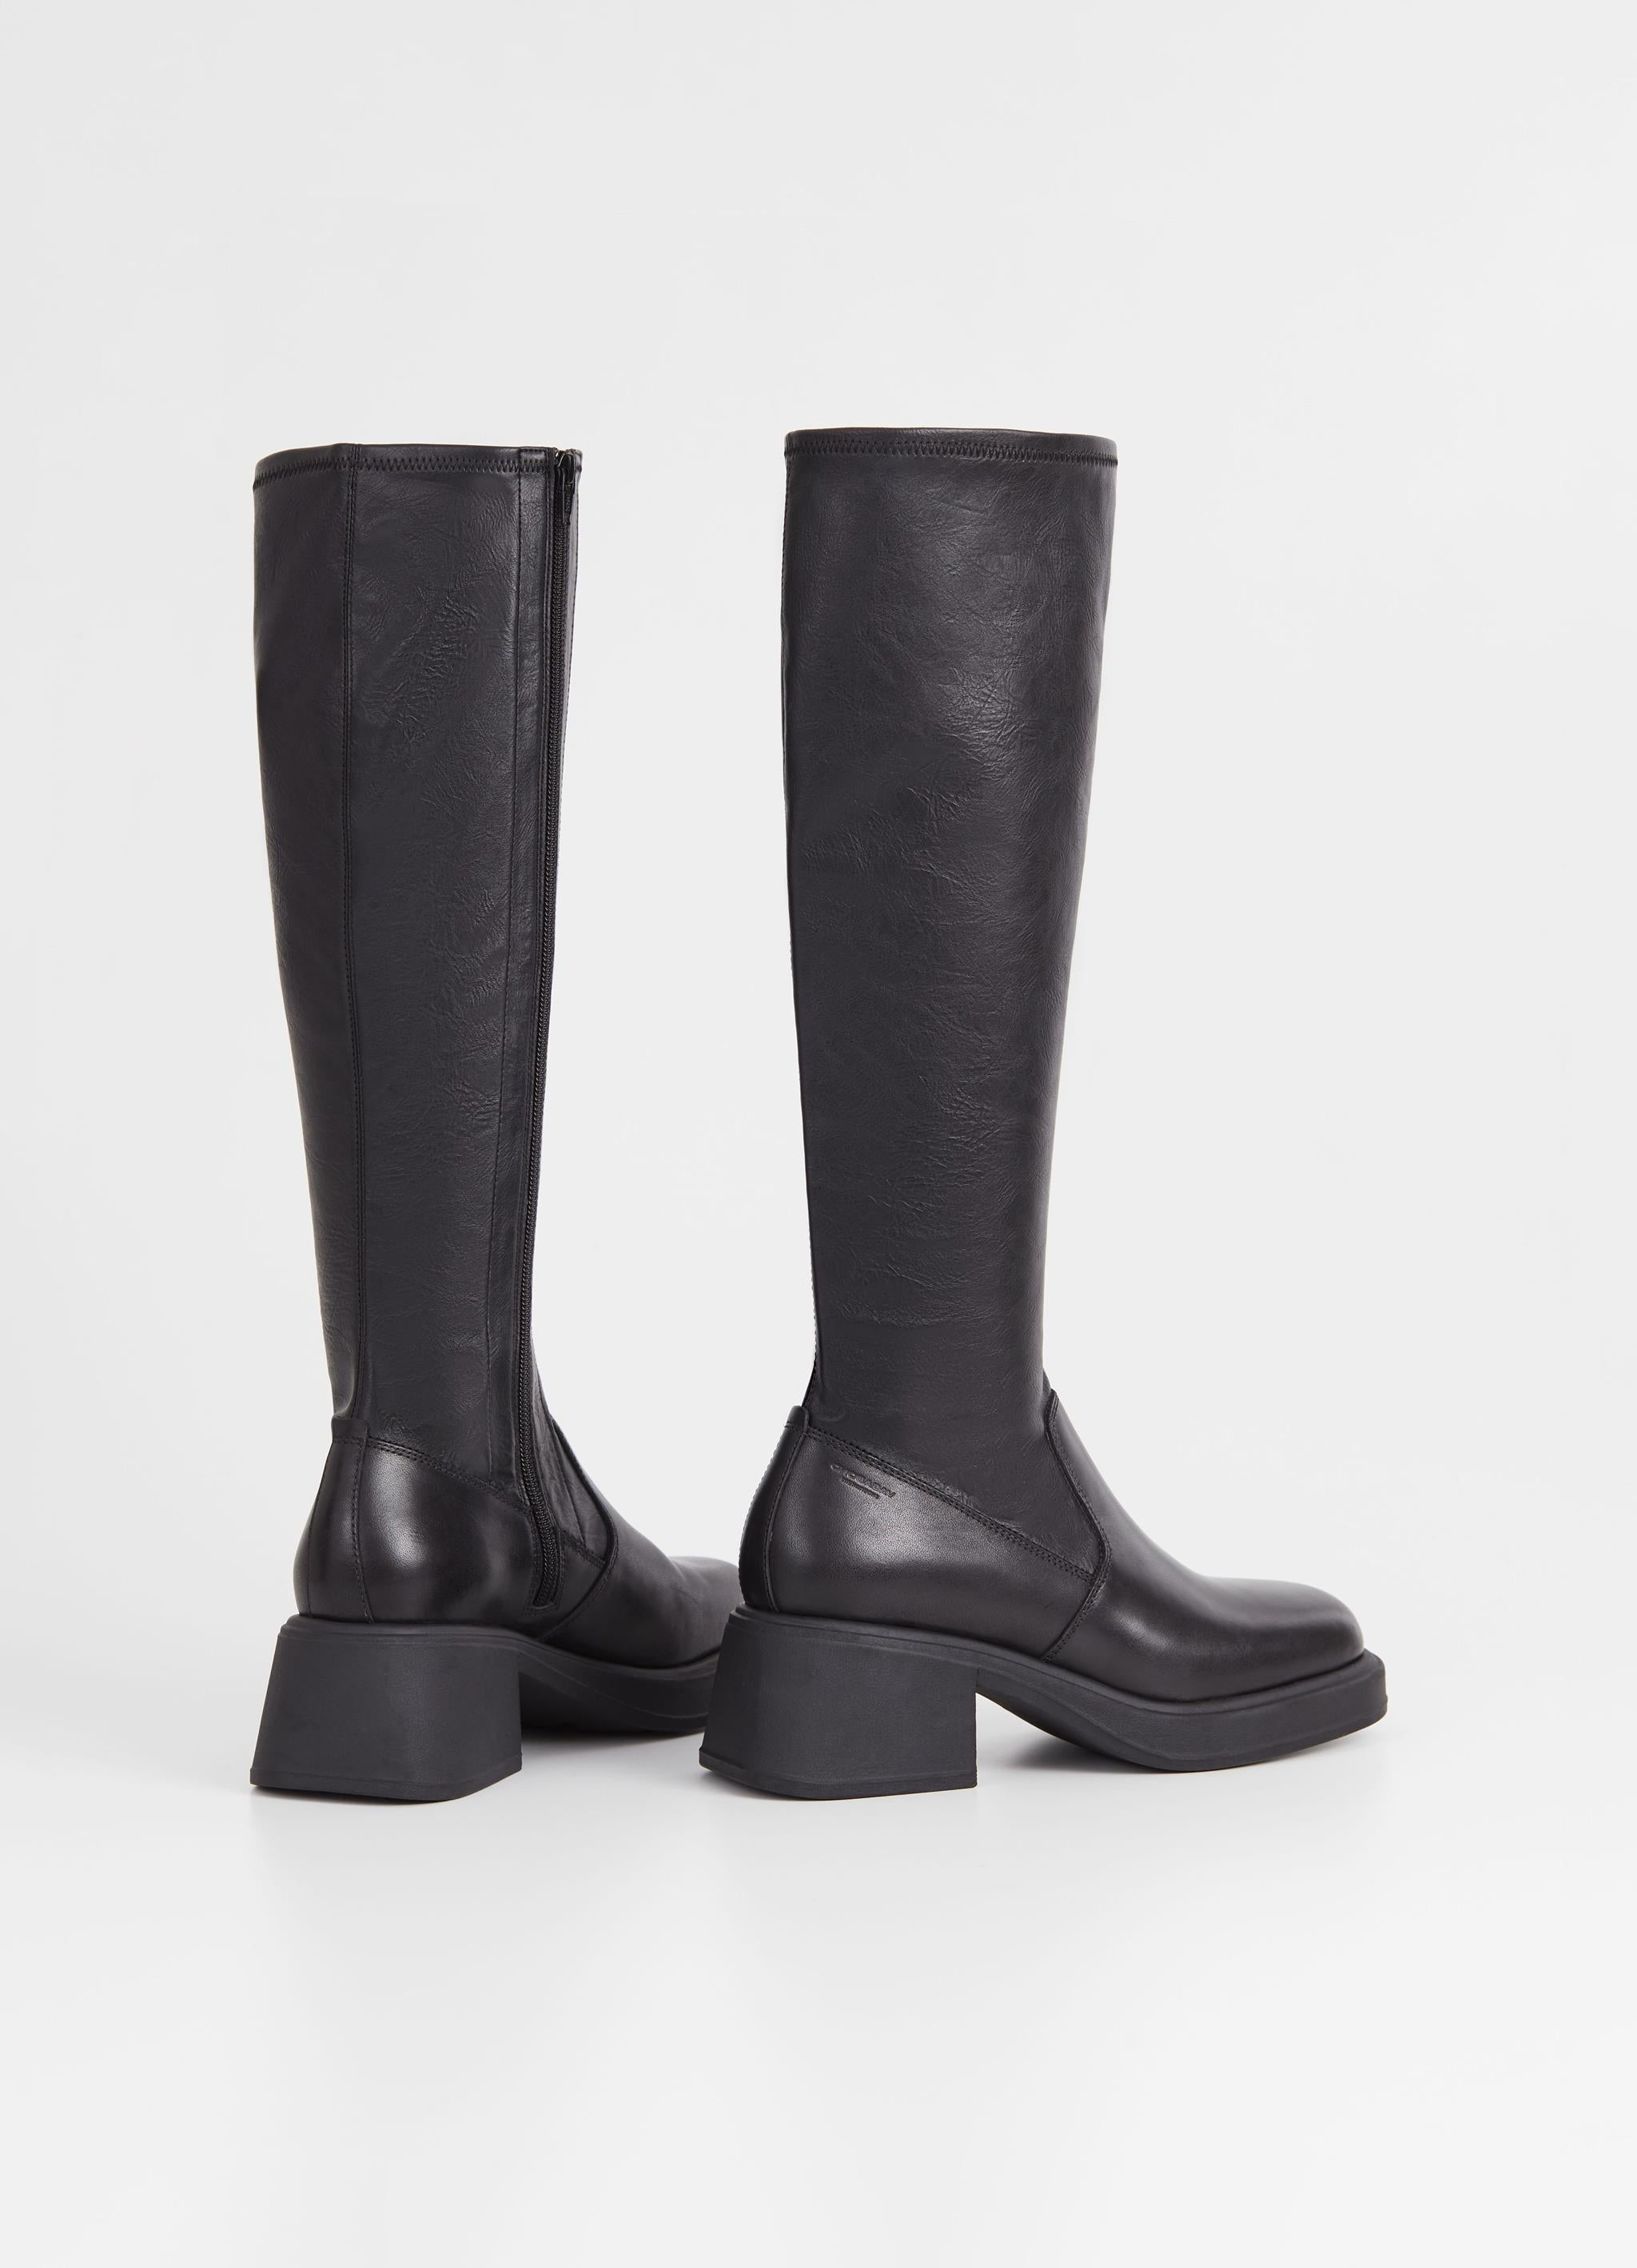 Tall leather and synthetic leather boots with moulded chunky sole and block heel